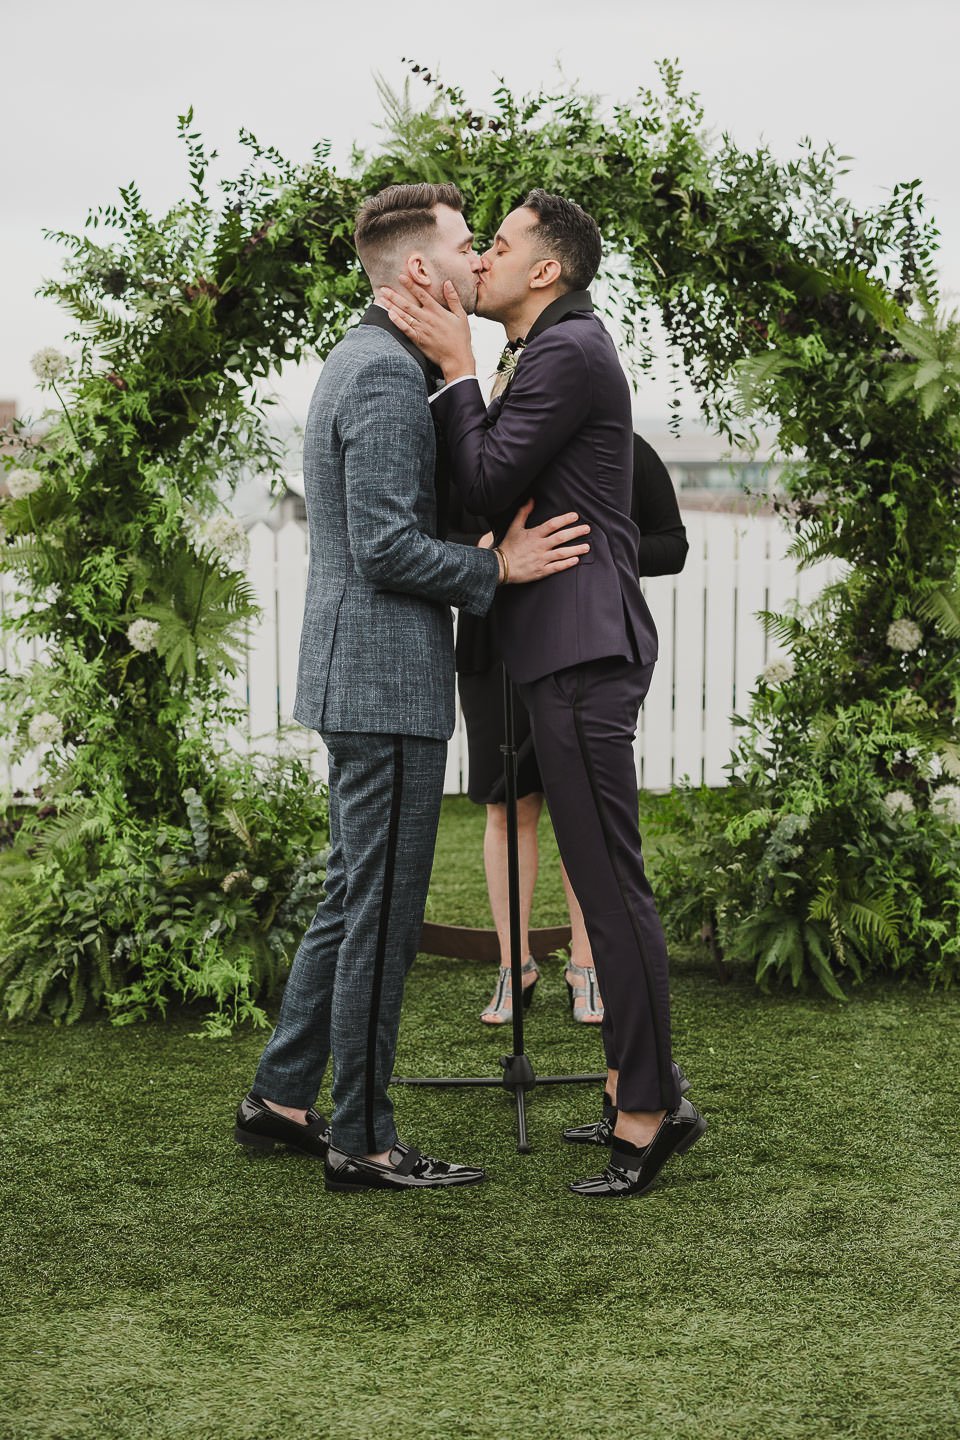 Grooms first kiss in front of lush greenery ceremony arch